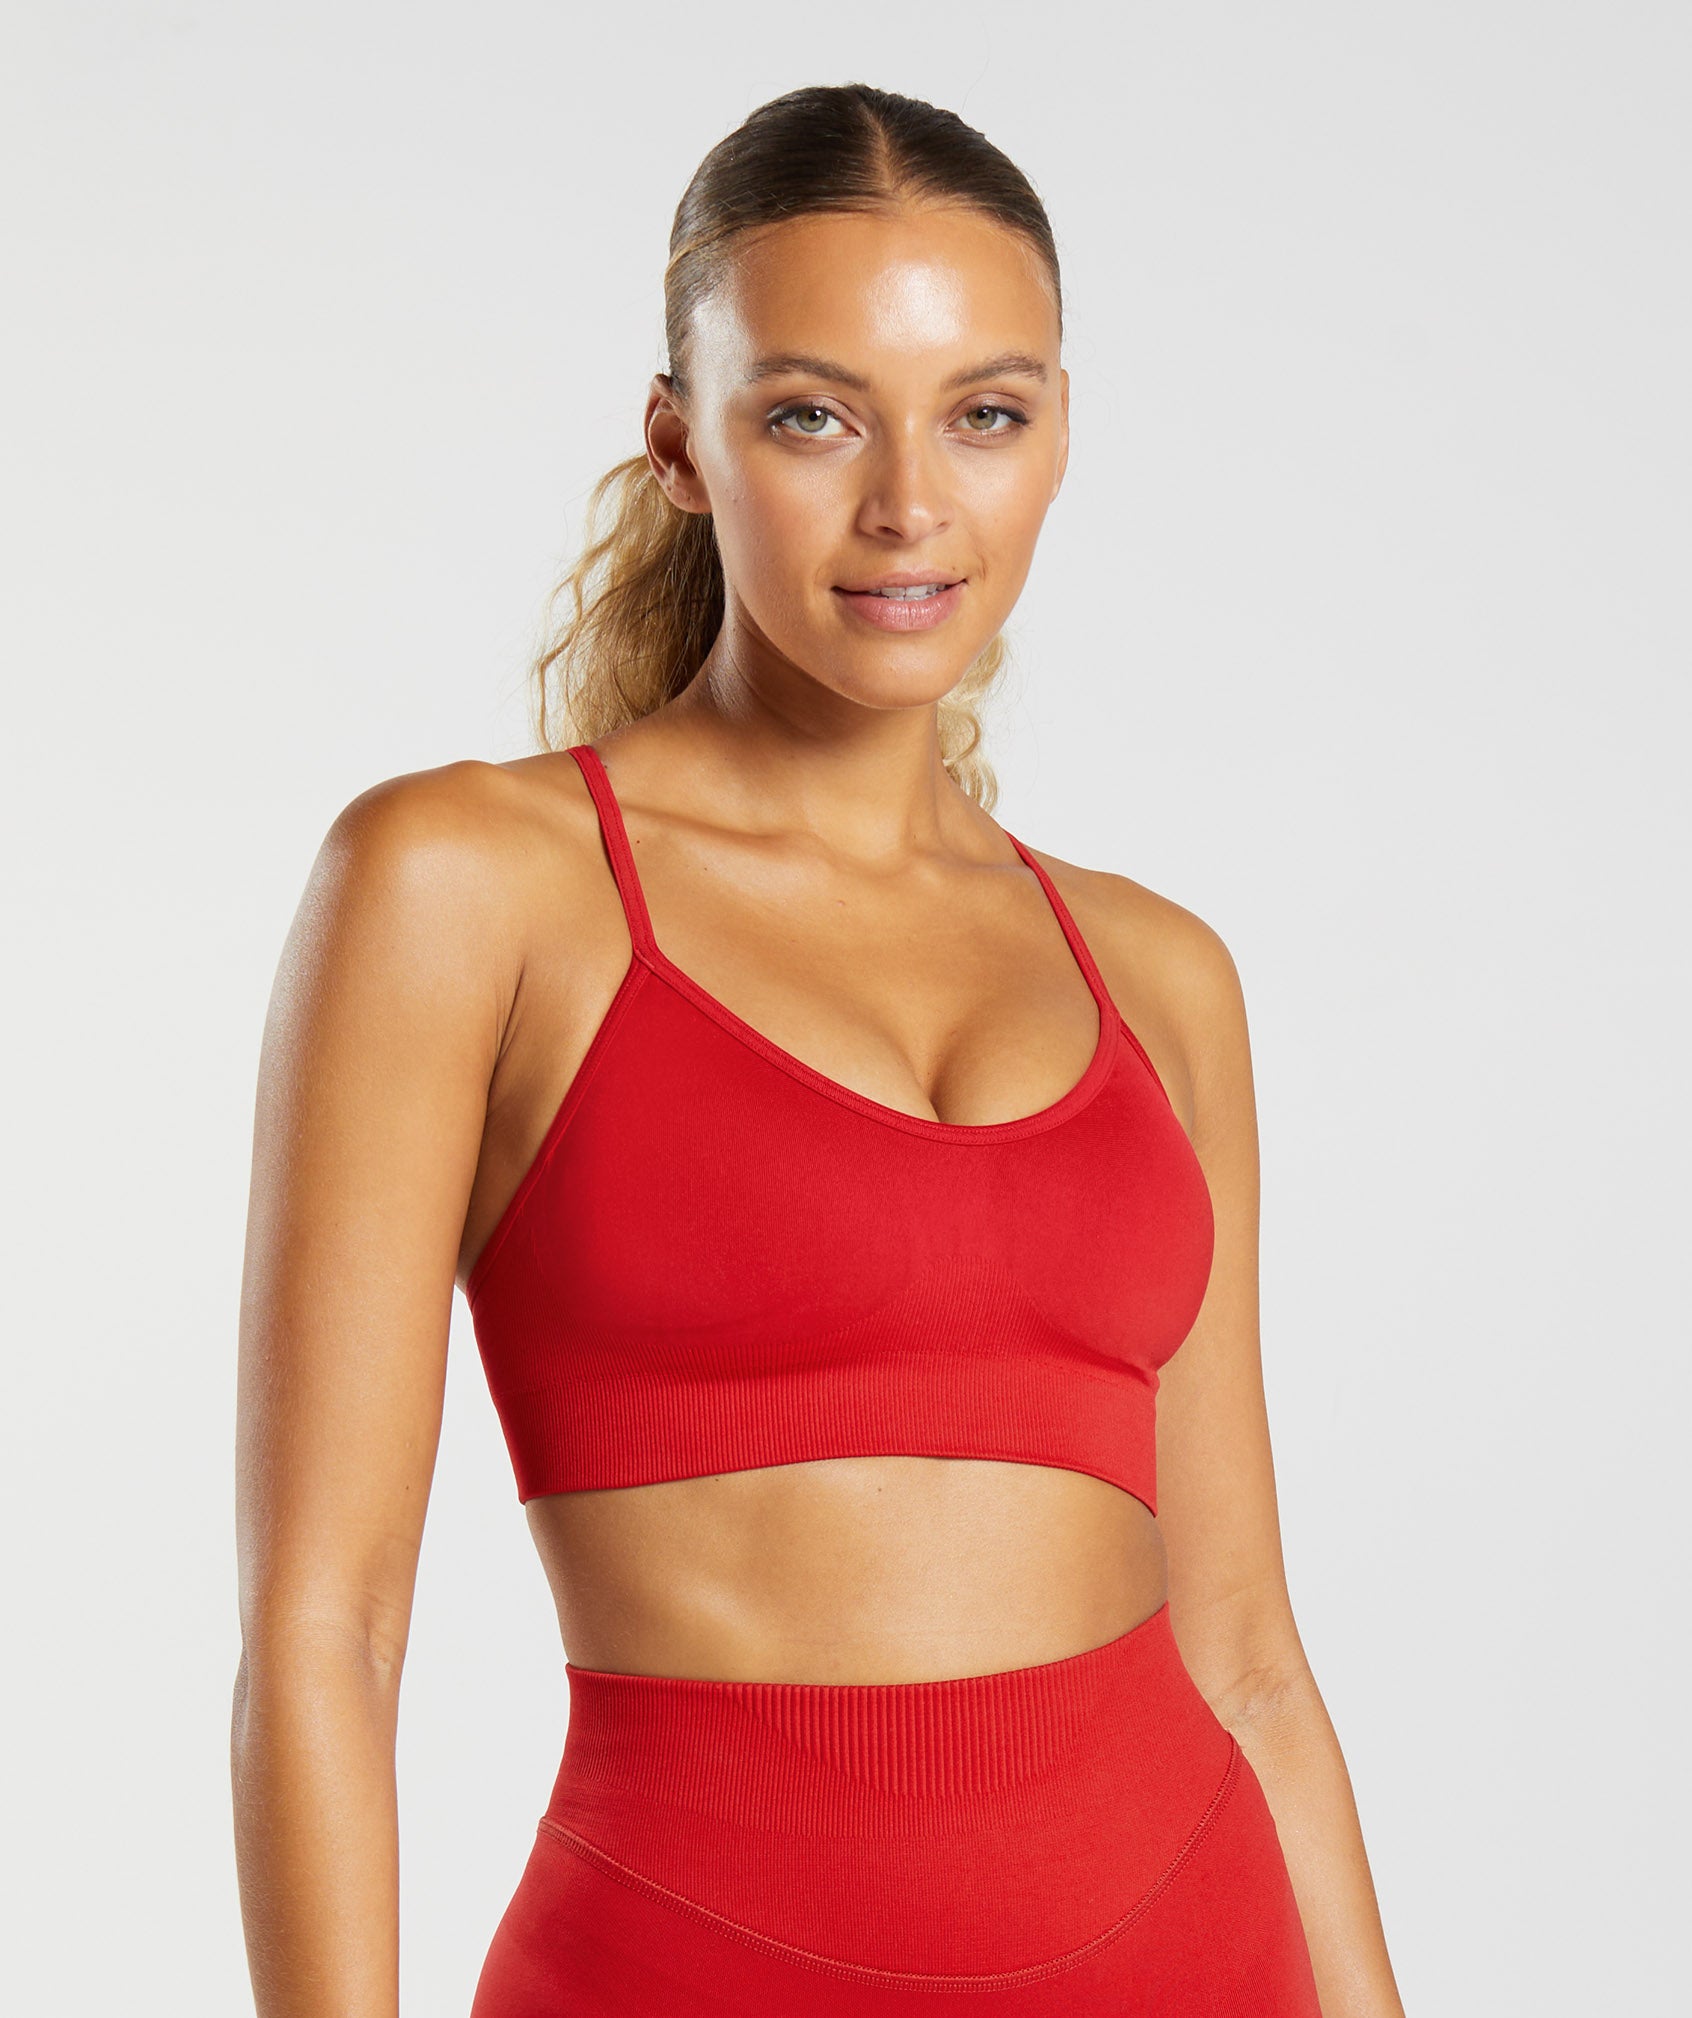 RQYYD Clearance Workout Sets for Women Short Sleeve Halter Strap Sports Bra  High Waist Yoga Shorts 2 Piece Seamless Ribbed Outfits Red S 